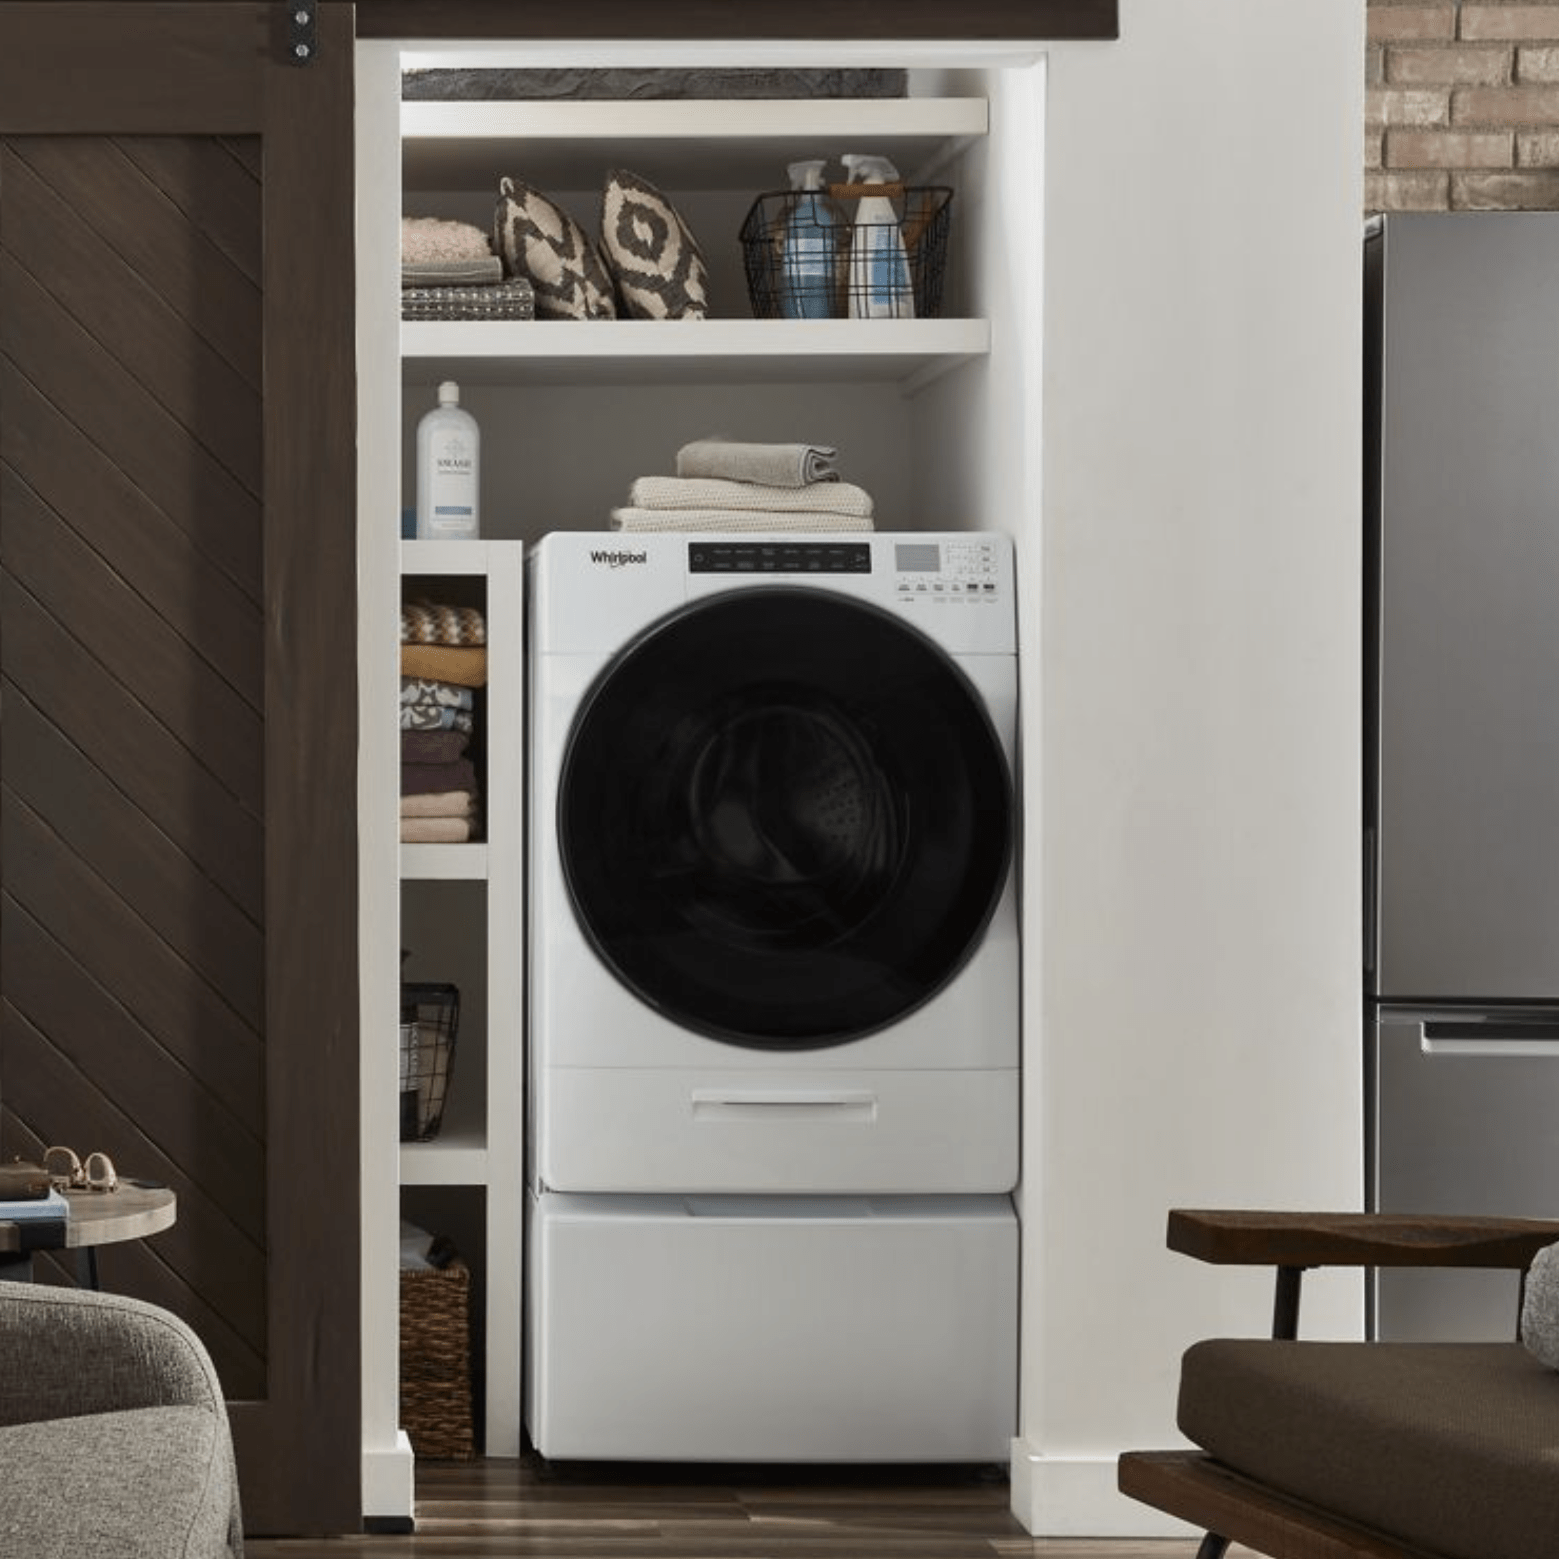 What to Consider Before Installing a Washer & Dryer in a Bathroom